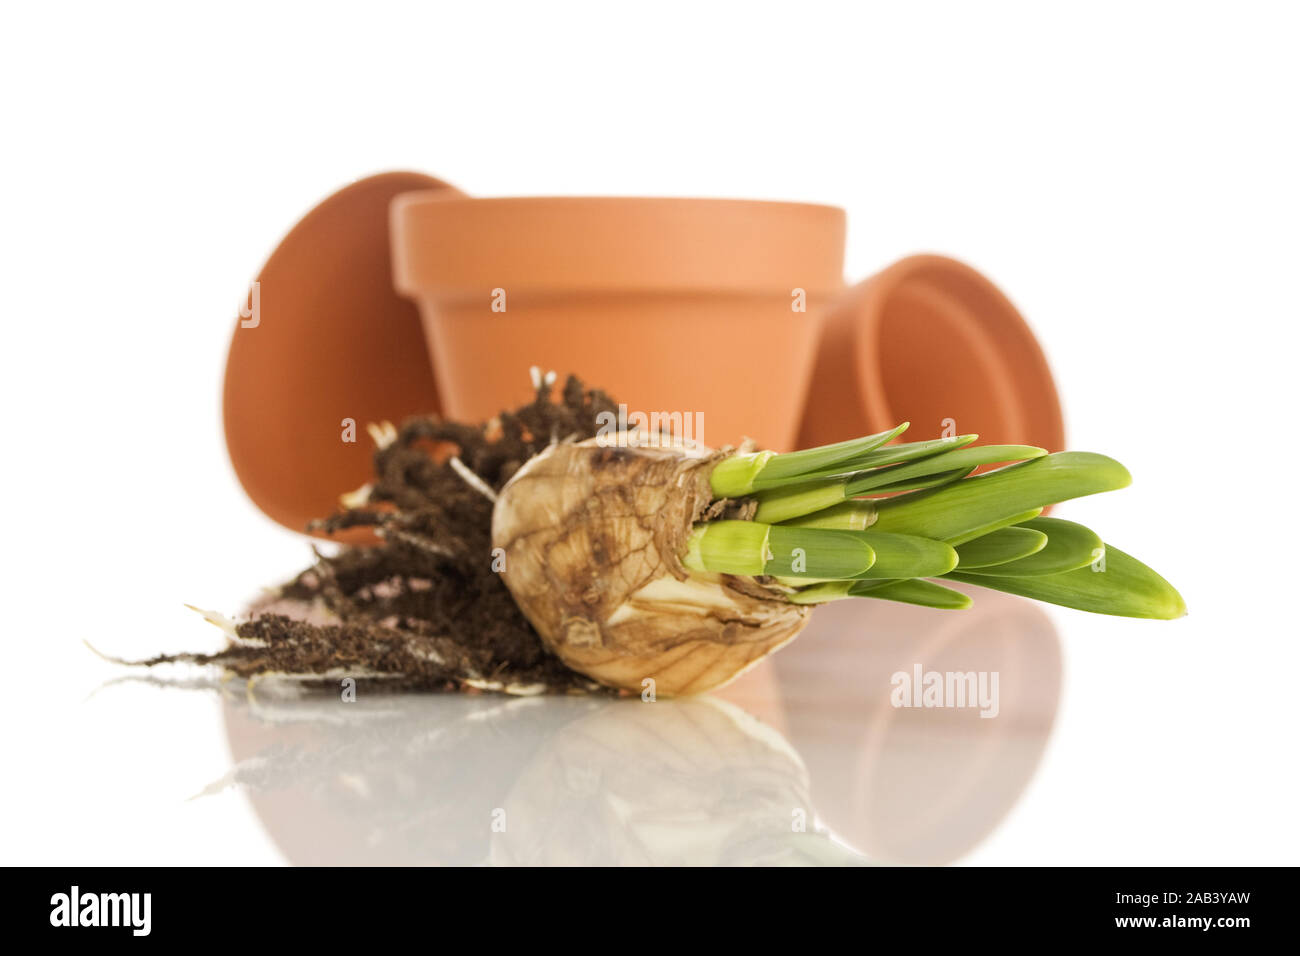 Narzissenknolle mit Blumentöpfe |Narcissus bulb with flower pots| Stock Photo